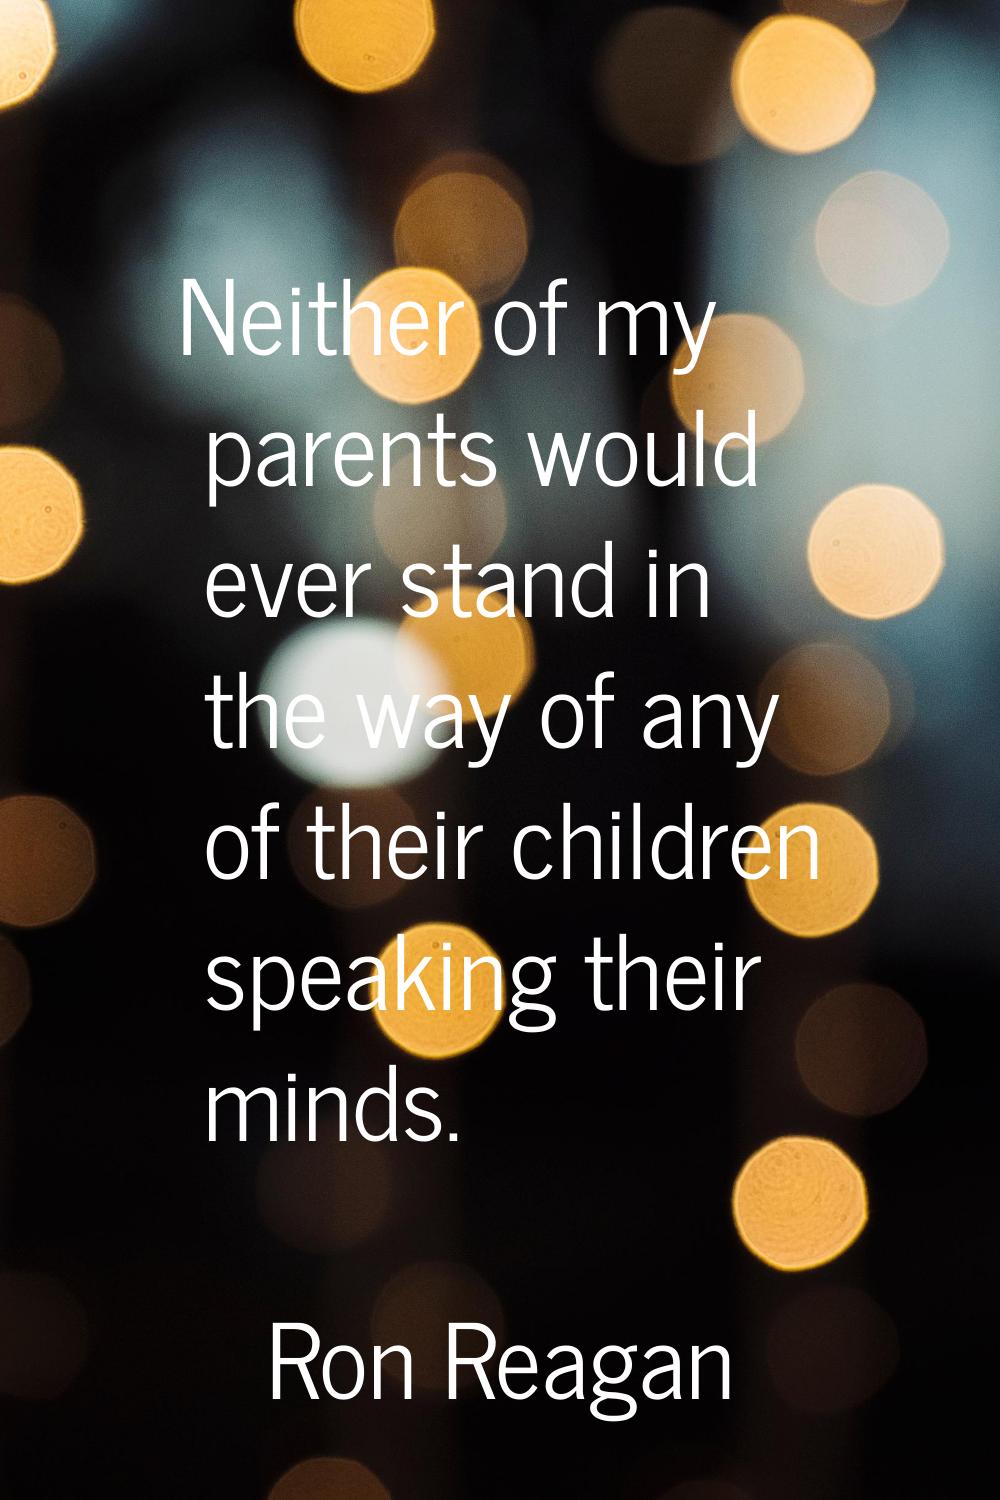 Neither of my parents would ever stand in the way of any of their children speaking their minds.